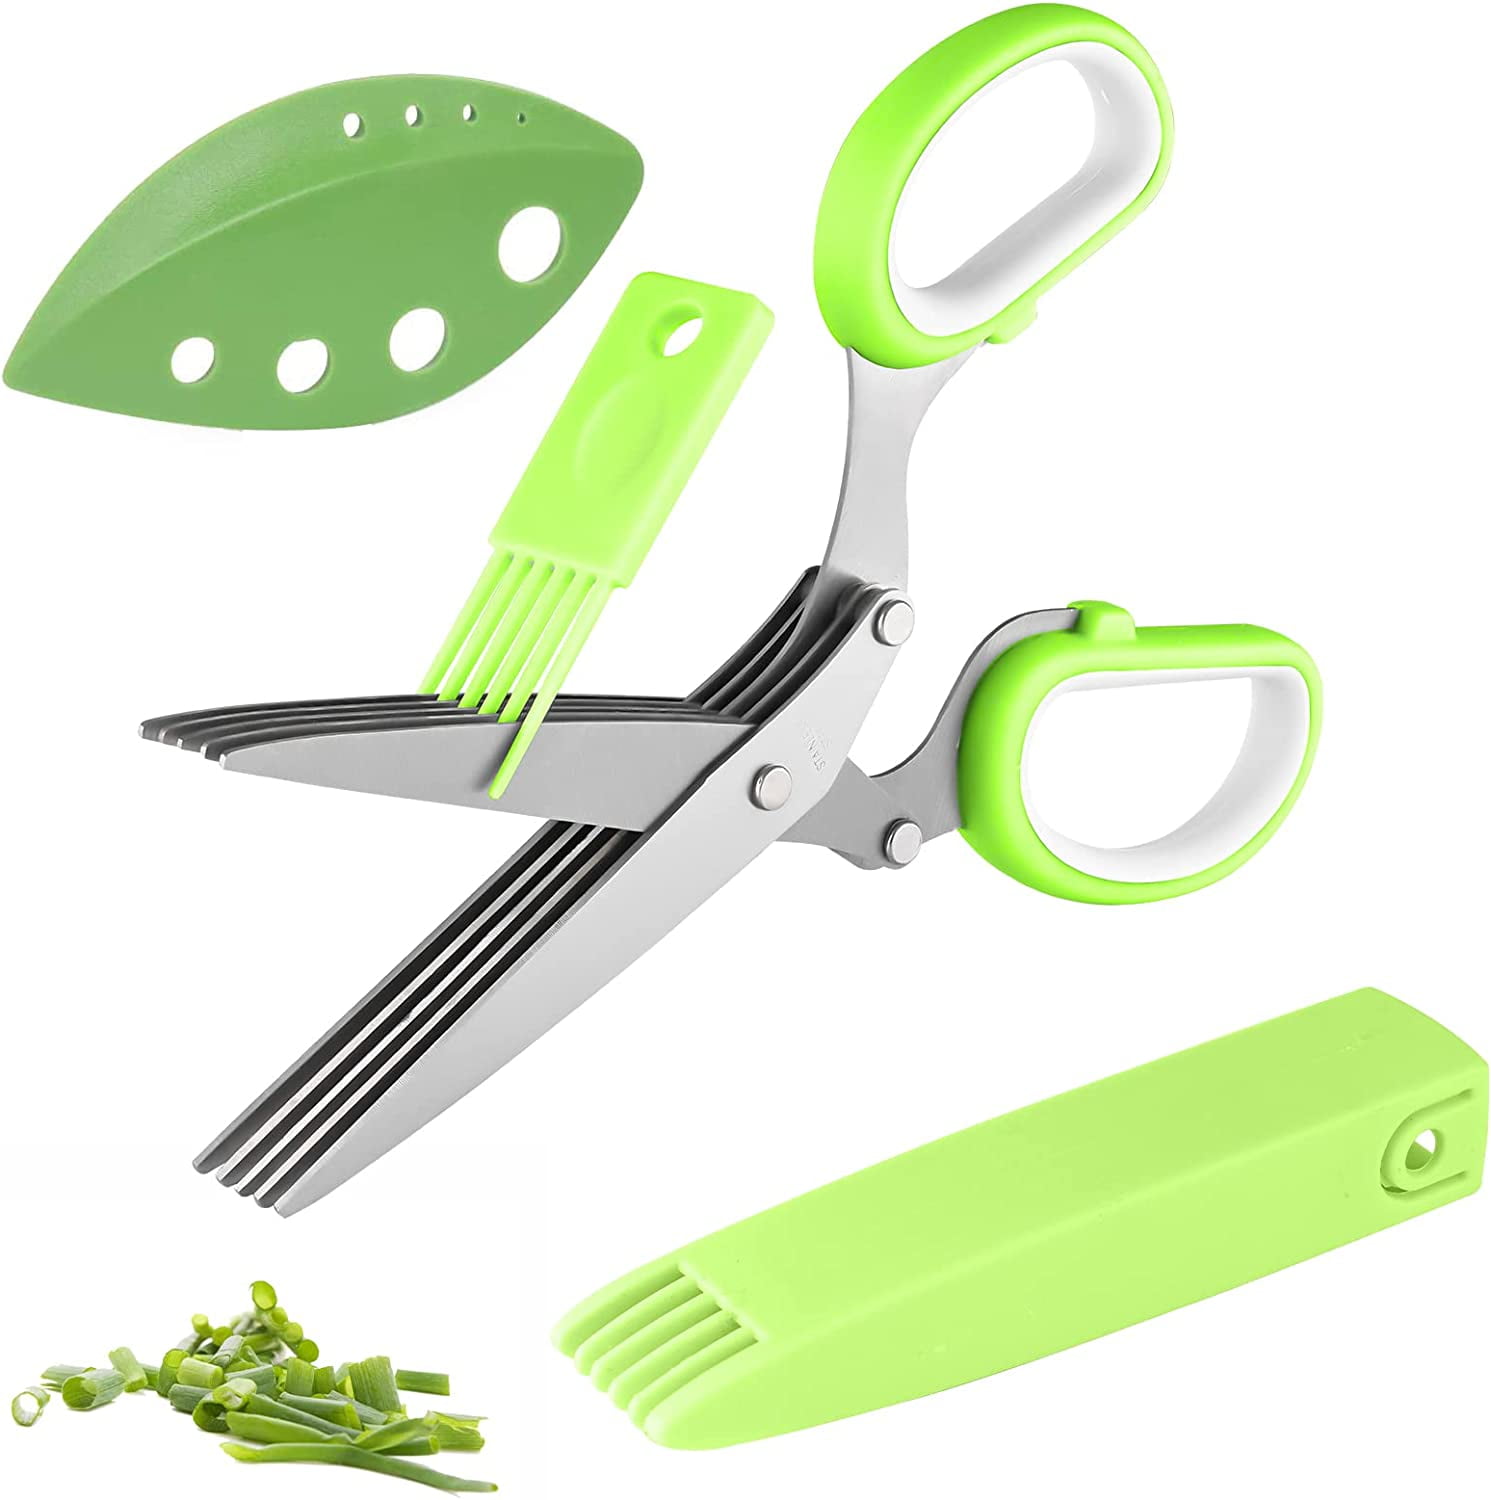 Joyoldelf Gourmet Herb Scissors Set - Master Culinary Multipurpose Cutting  Shears with Stainless Steel 5 Blades, Safety Cover and Cleaning Comb for  Cutting Cilantro Onion Salad 